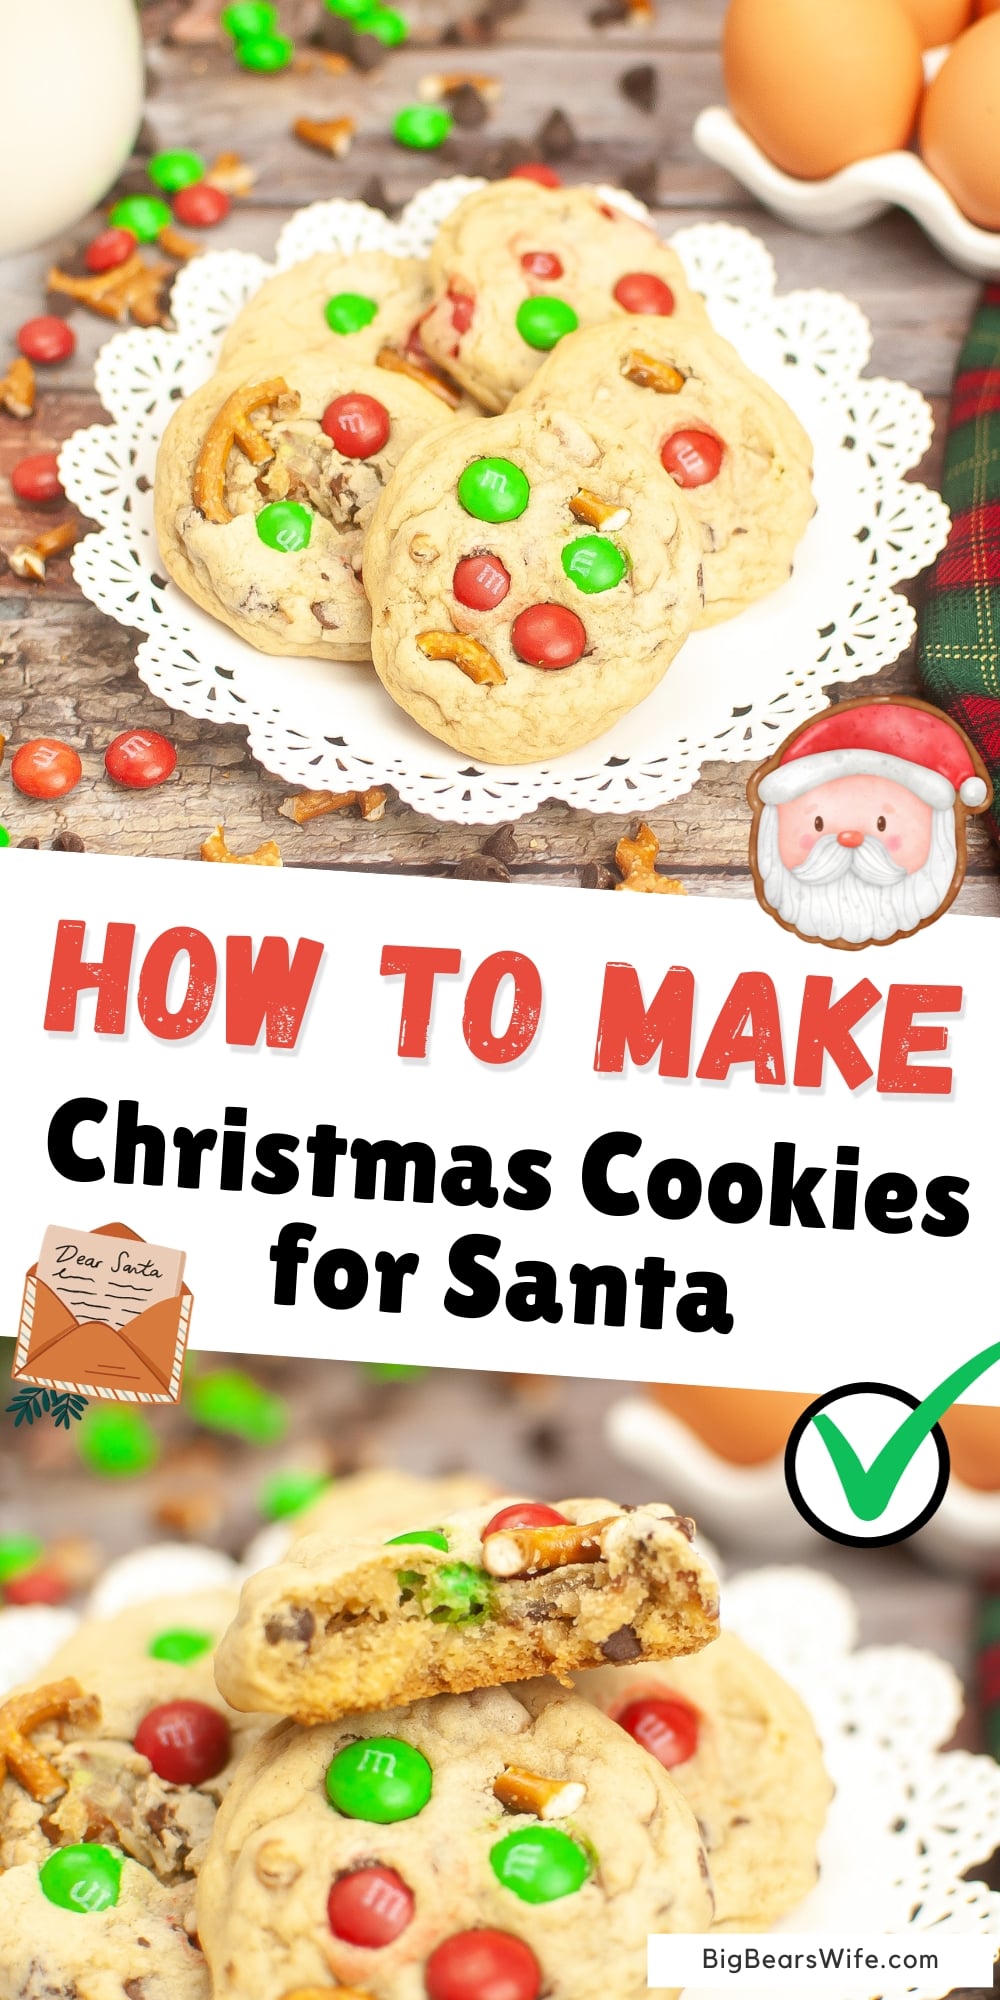 Want to make sure your Christmas cookies are up to Santa's standards? Follow these expert guidelines and tips to bake the perfect Christmas Cookies for Santa that will earn you extra points with Mr. Claus himself. via @bigbearswife